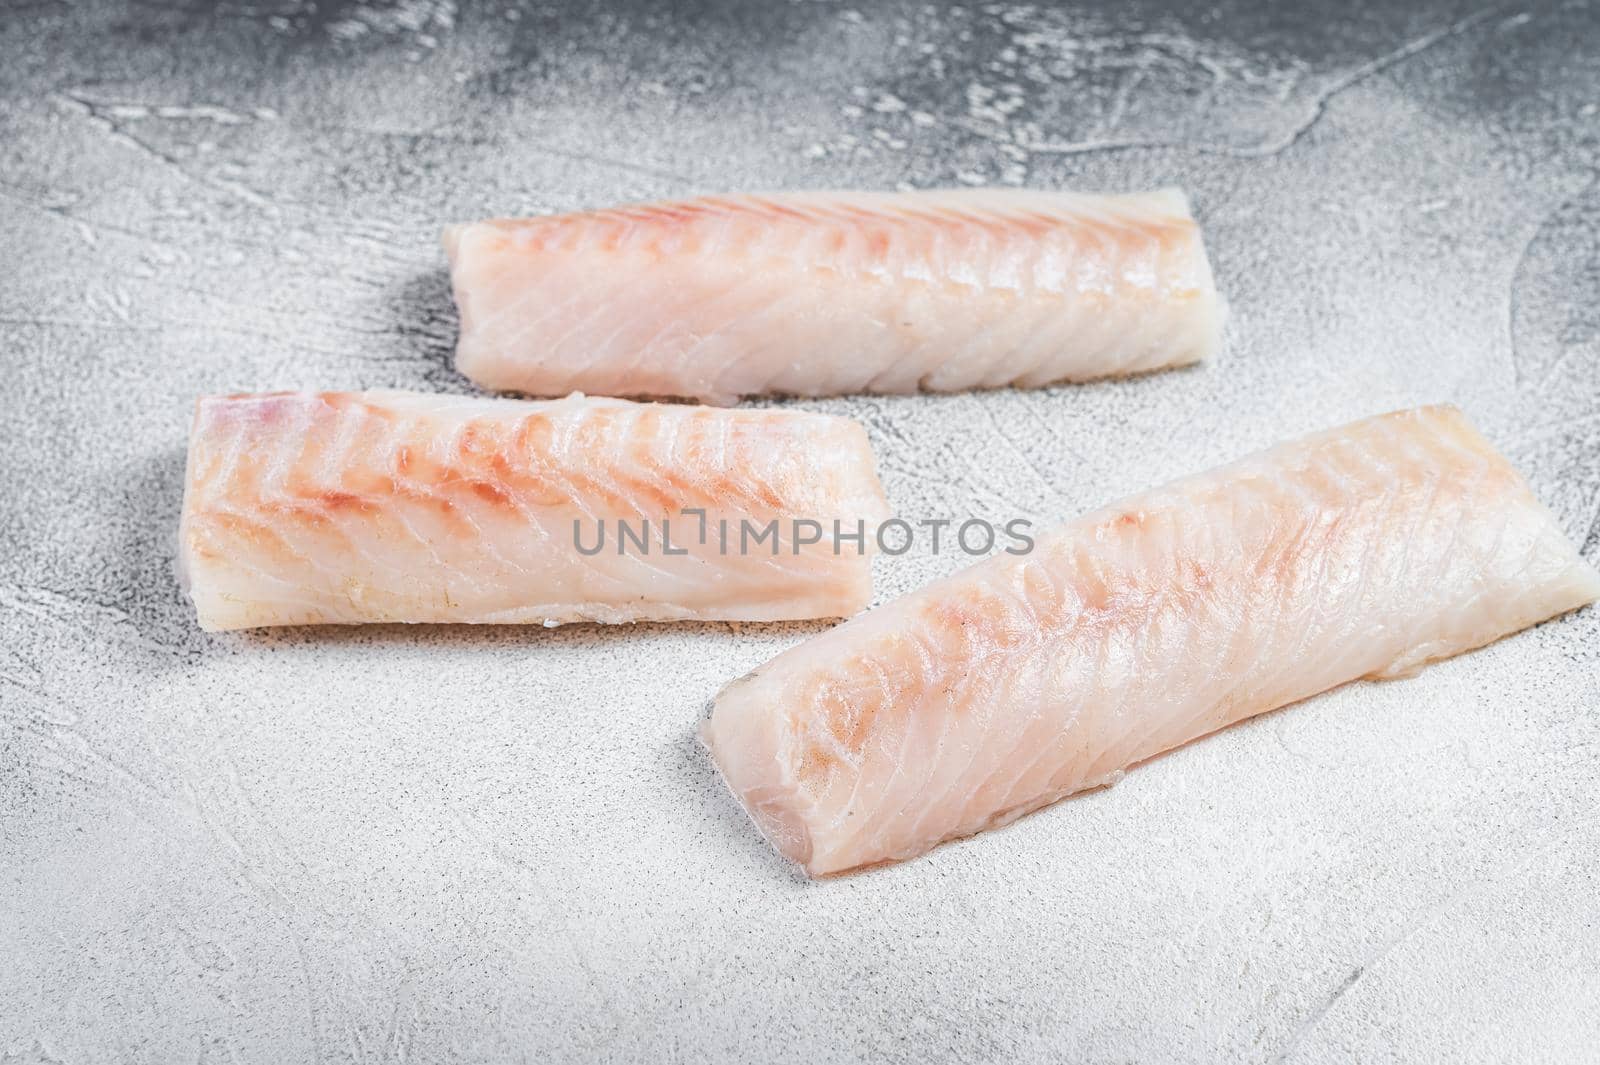 Raw Norwegian cod fish fillet on kitchen table. White background. Top view by Composter